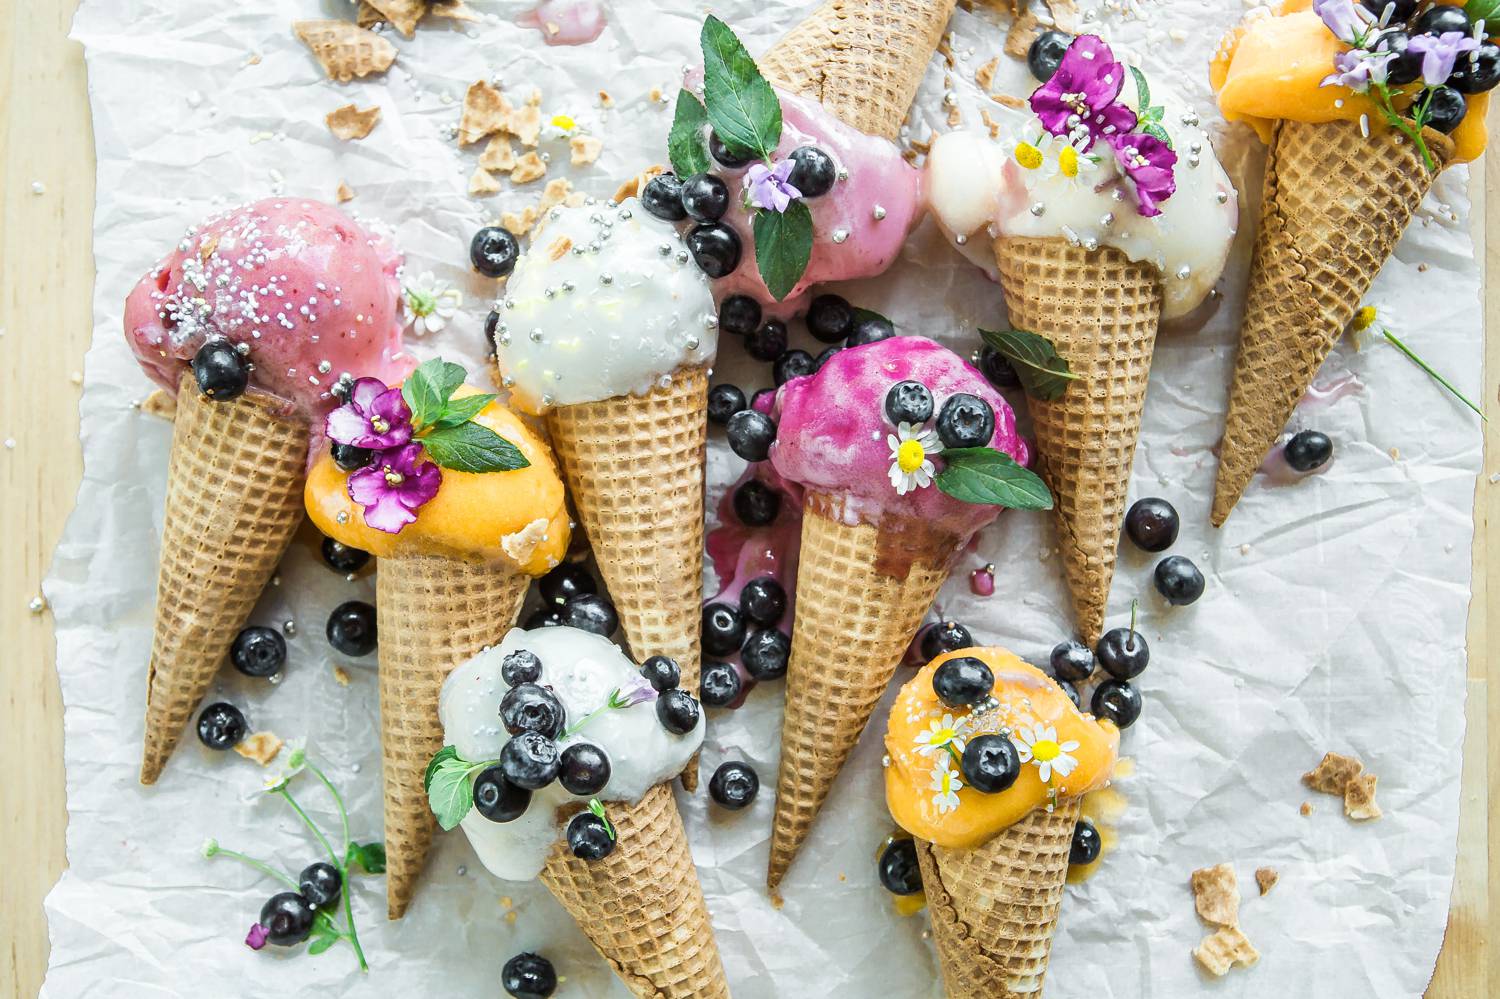 Colorful ice cream cones are displayed on a marble slap and covered with berries and mint sprigs